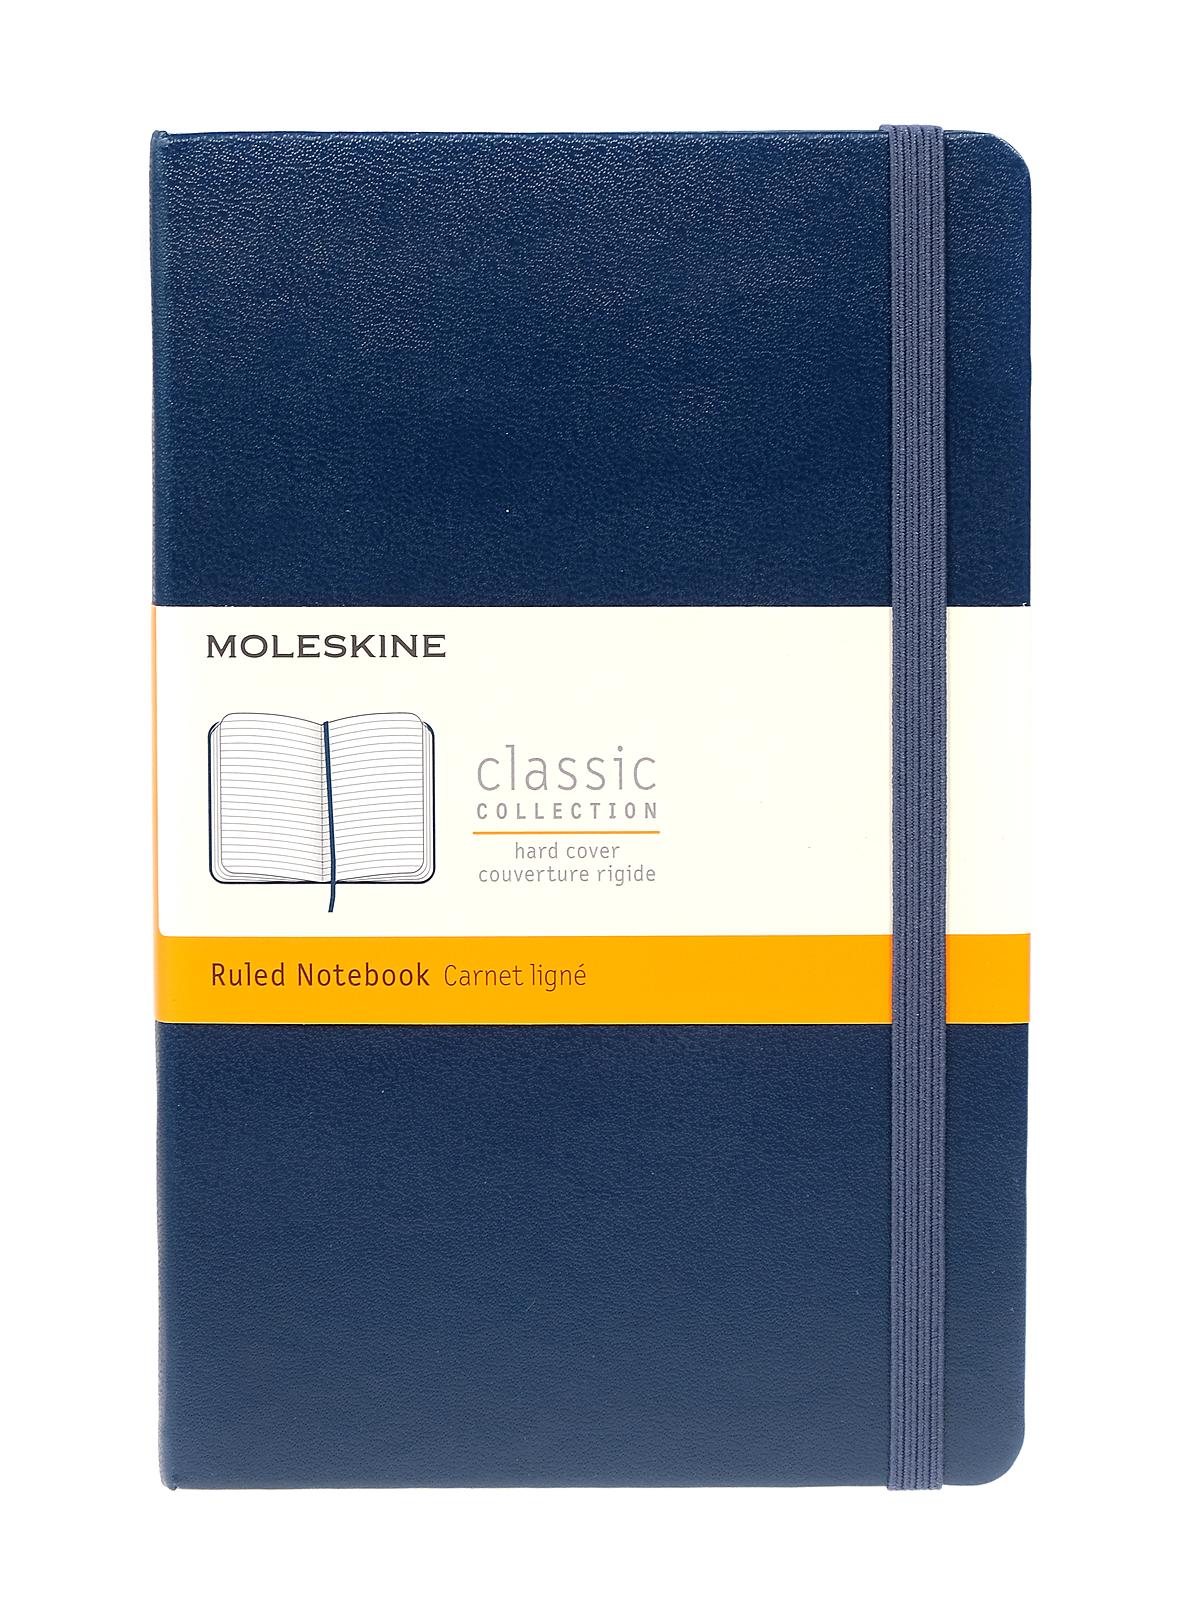 Classic Hard Cover Notebooks Sapphire Blue 4 1 2 In. X 7 In. 218 Pages, Lined